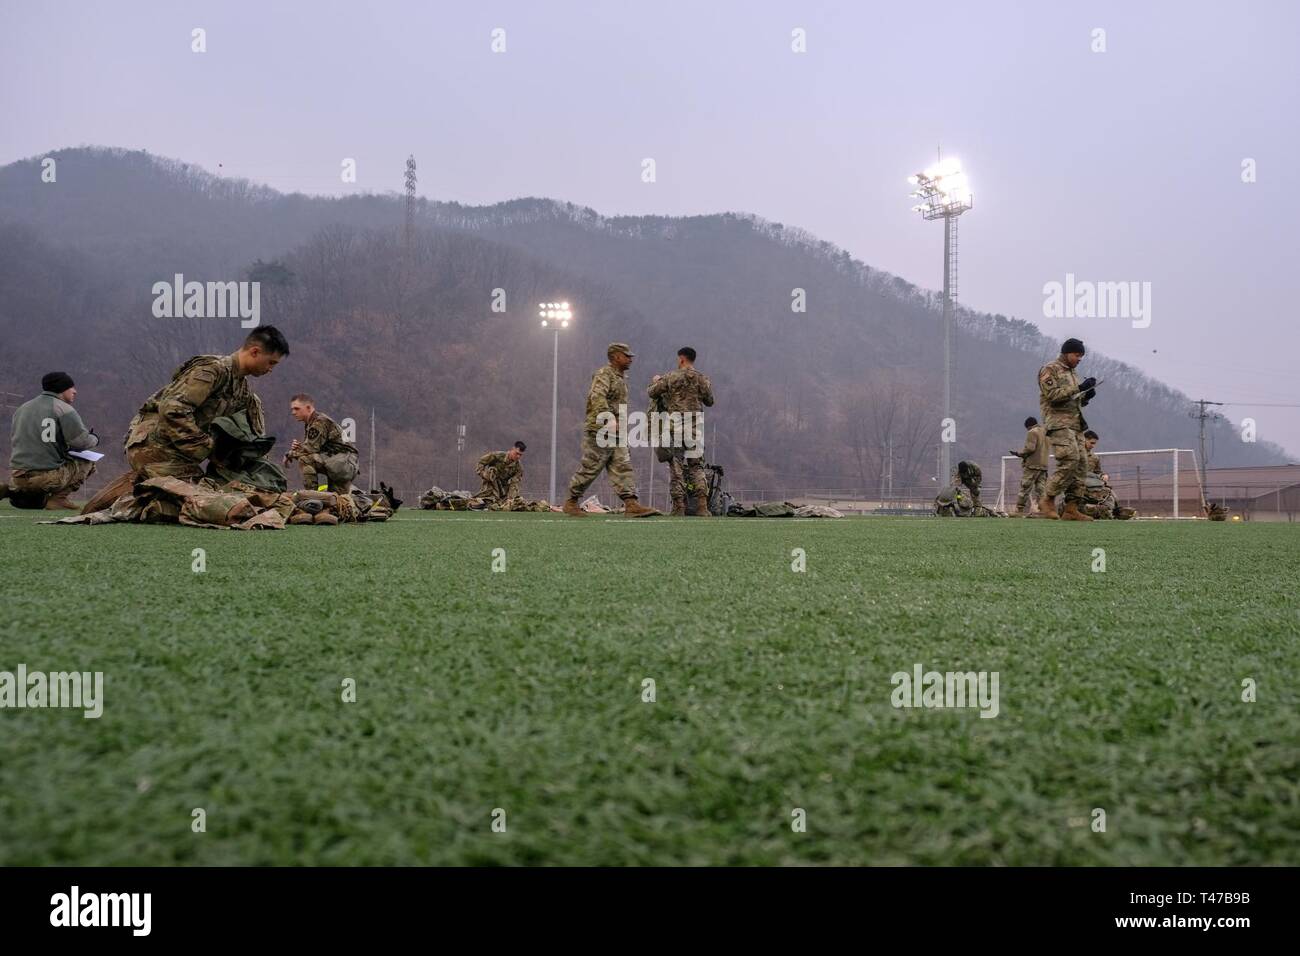 Competitors from the 210th Field Artillery Brigade 2019 Best Warrior Competition layout their gear at Schoonover Bowl following the eight-mile ruck march, Camp Casey, Republic of Korea, March 12, 2019. The ruck march began this year’s competition with 24 Soldiers competing for first place in the following ranks: junior enlisted, noncommissioned officer, warrant officer, commissioned officer, and Korean Augmentation to the United States Army (KATUSA).The competition served as a valuable training experience, and the winners will advance to the 2nd Infantry Division Best Warrior Competition April Stock Photo